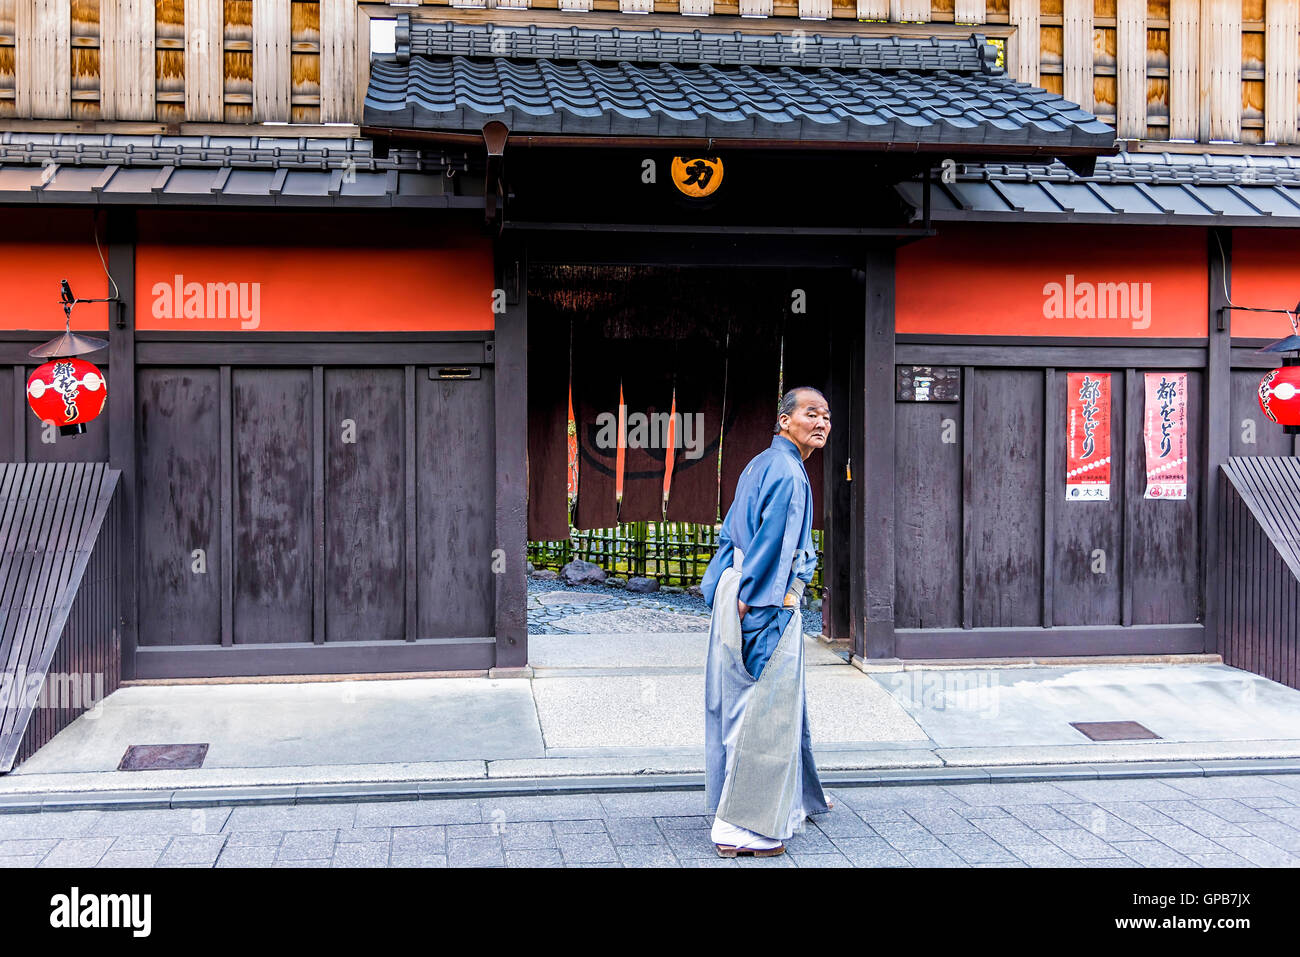 Kyoto, Japan - April 23, 2014: Old man in front of Ichiriki Chaya entrance in Gion district. Stock Photo